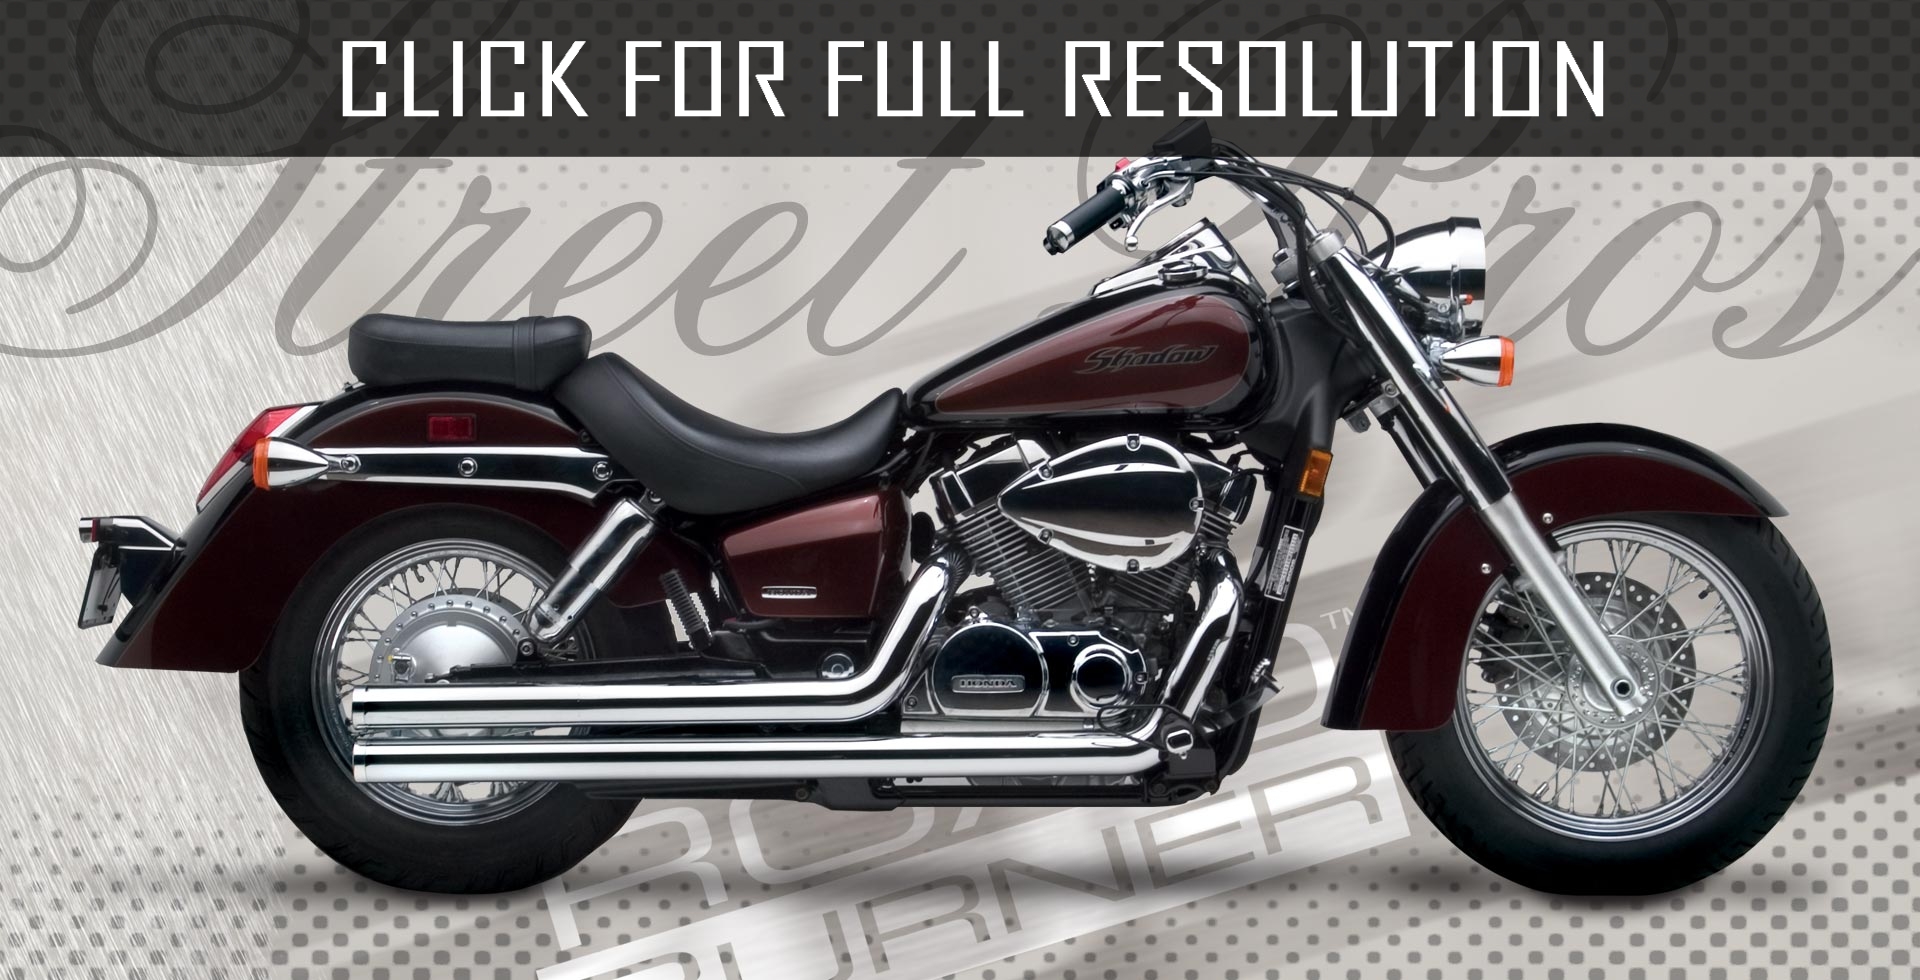 Honda Shadow 650 - amazing photo gallery, some information and ...